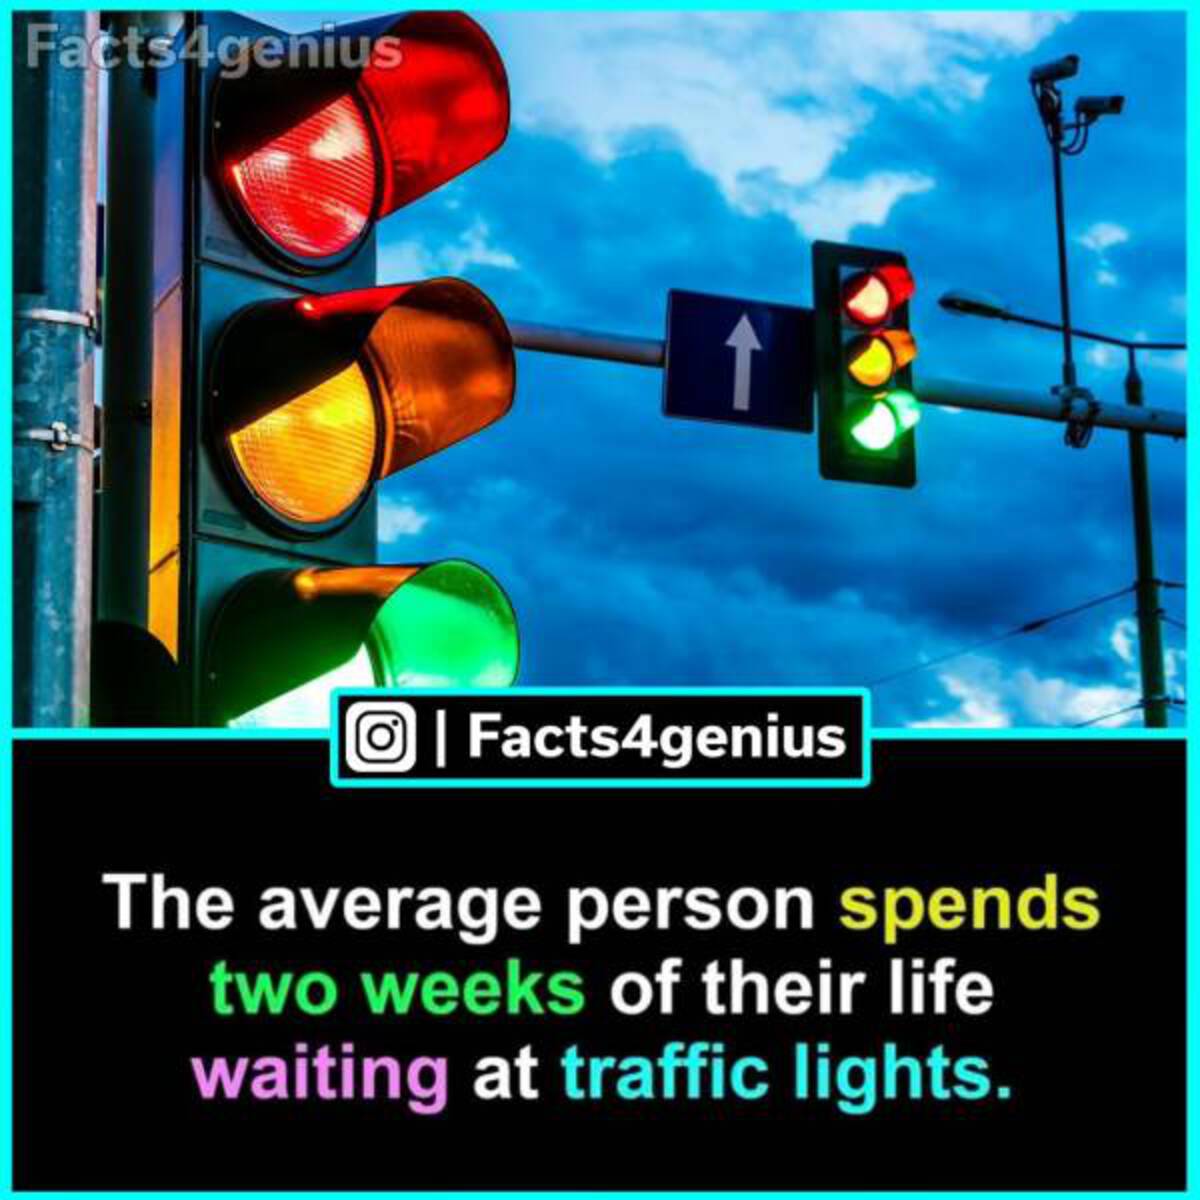 traffic lights - Facts4genius Facts4genius The average person spends two weeks of their life waiting at traffic lights.